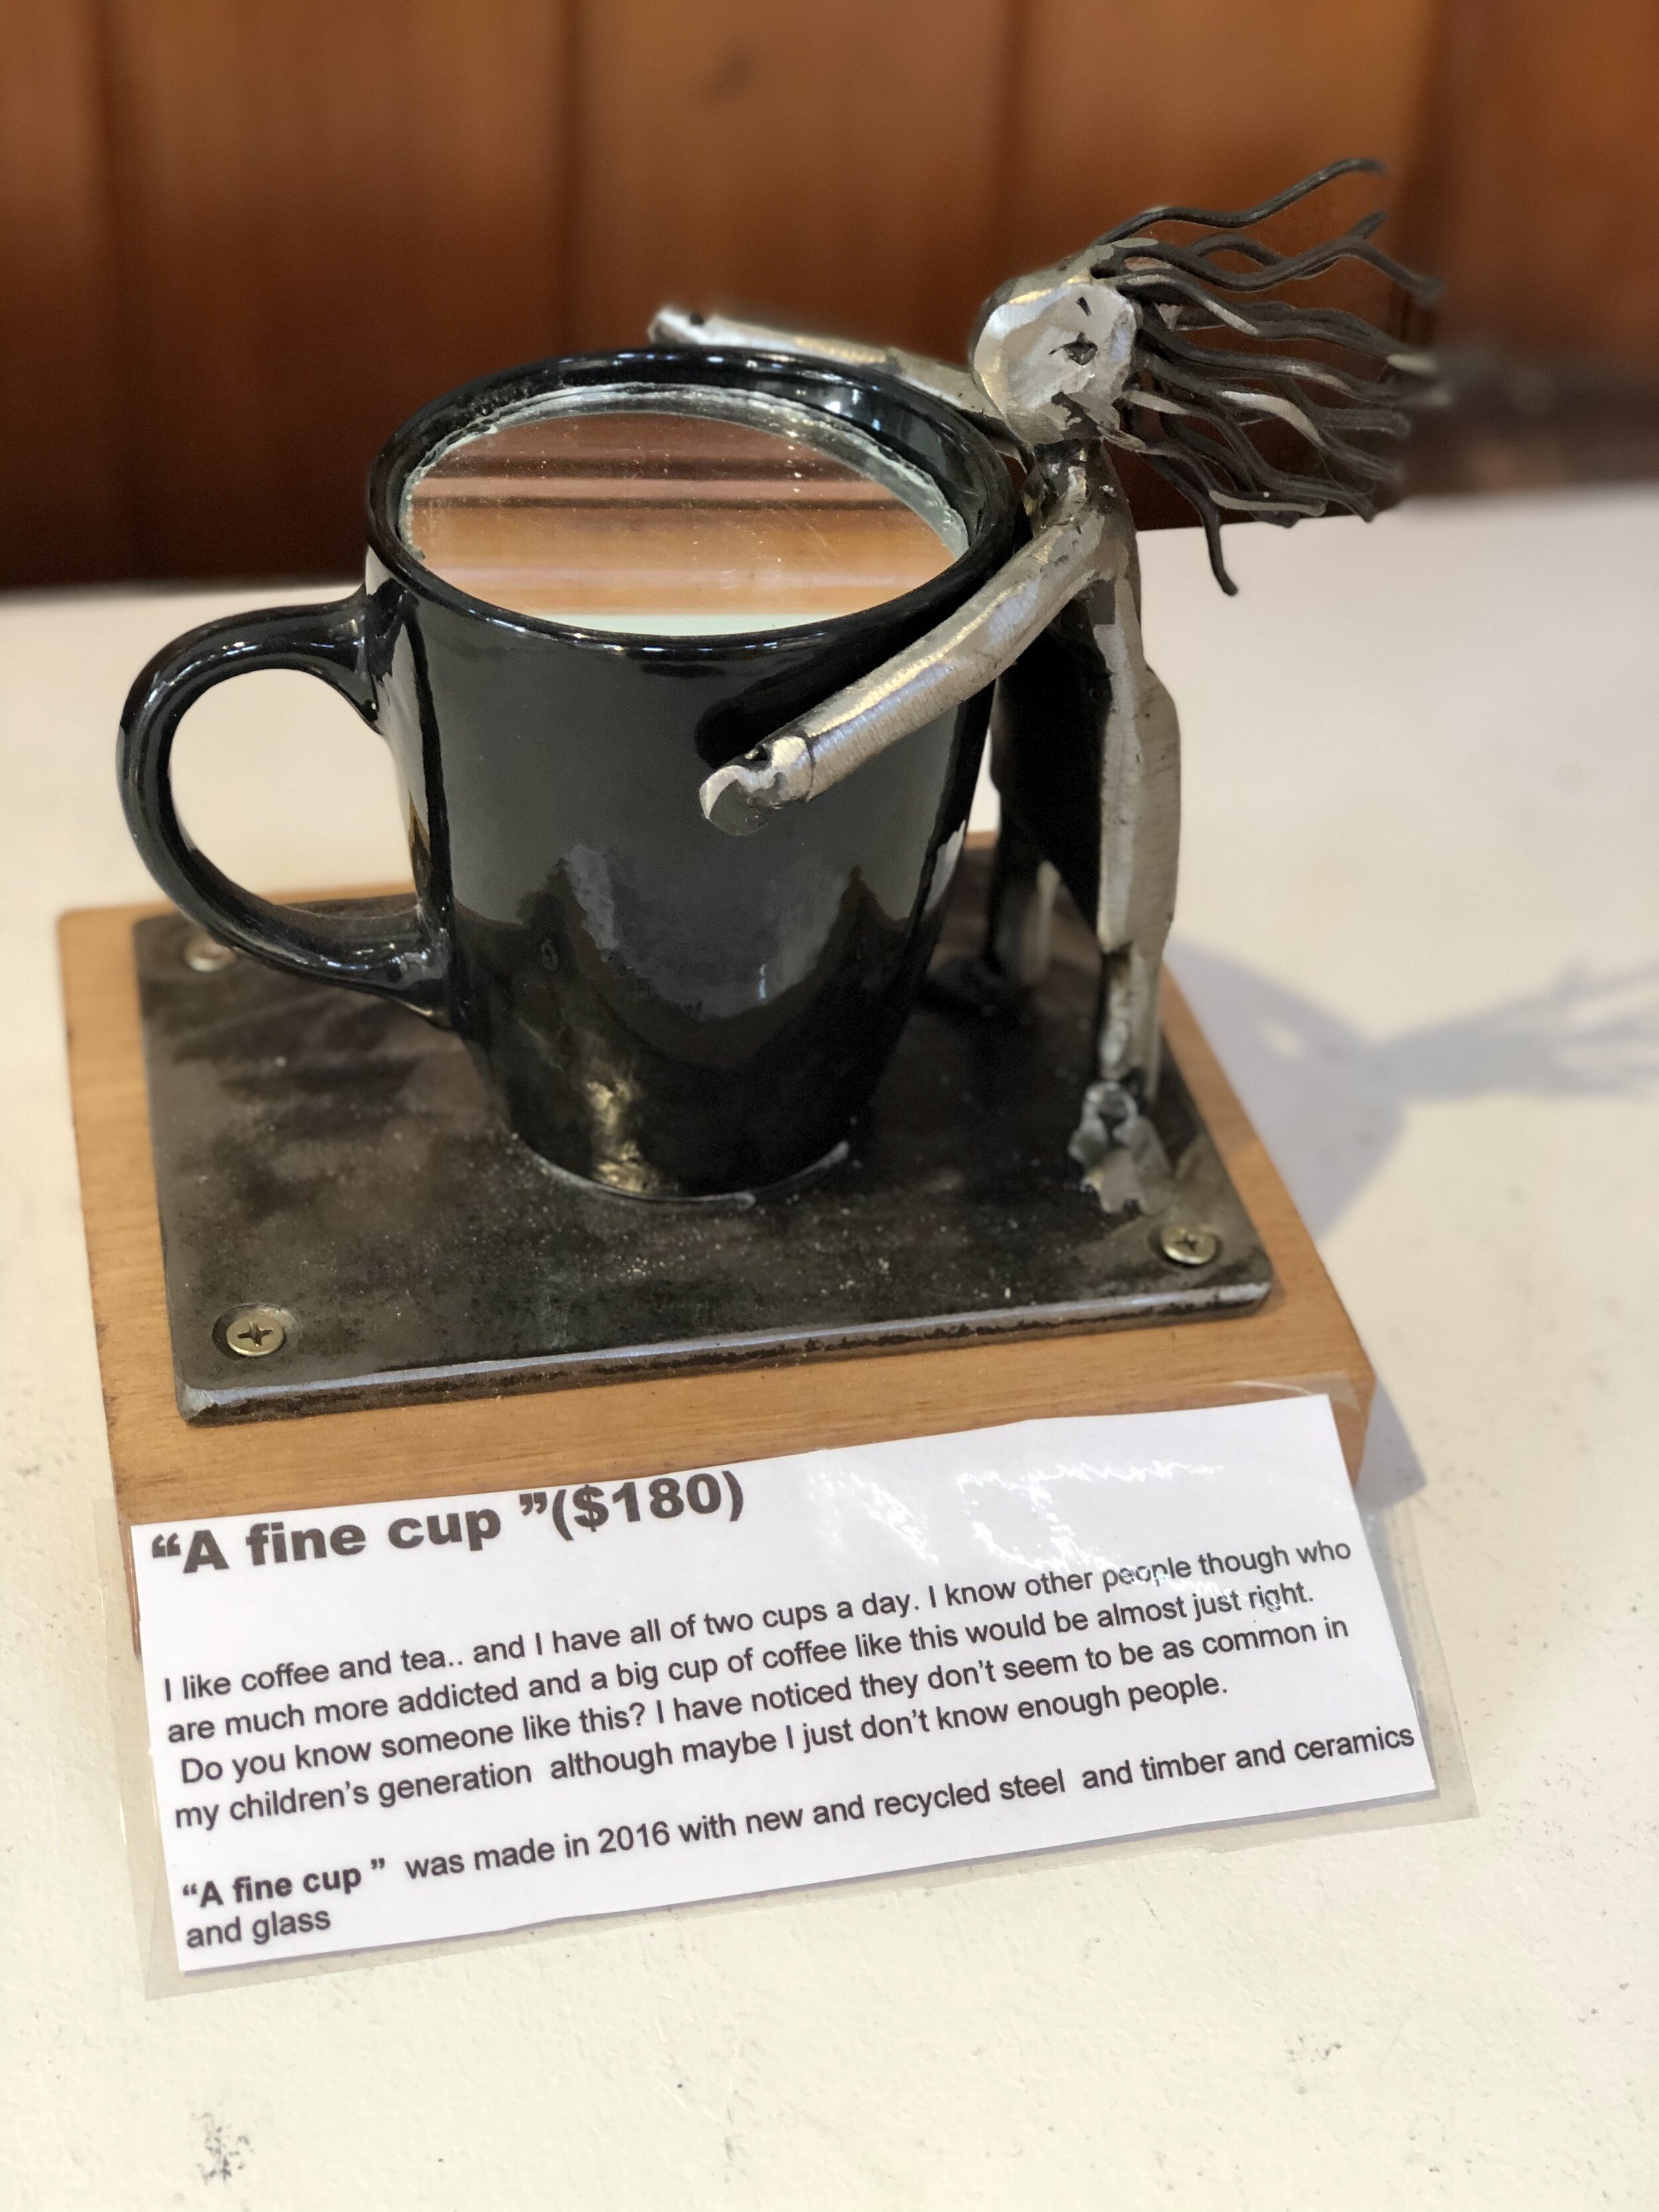 "A fine cup"